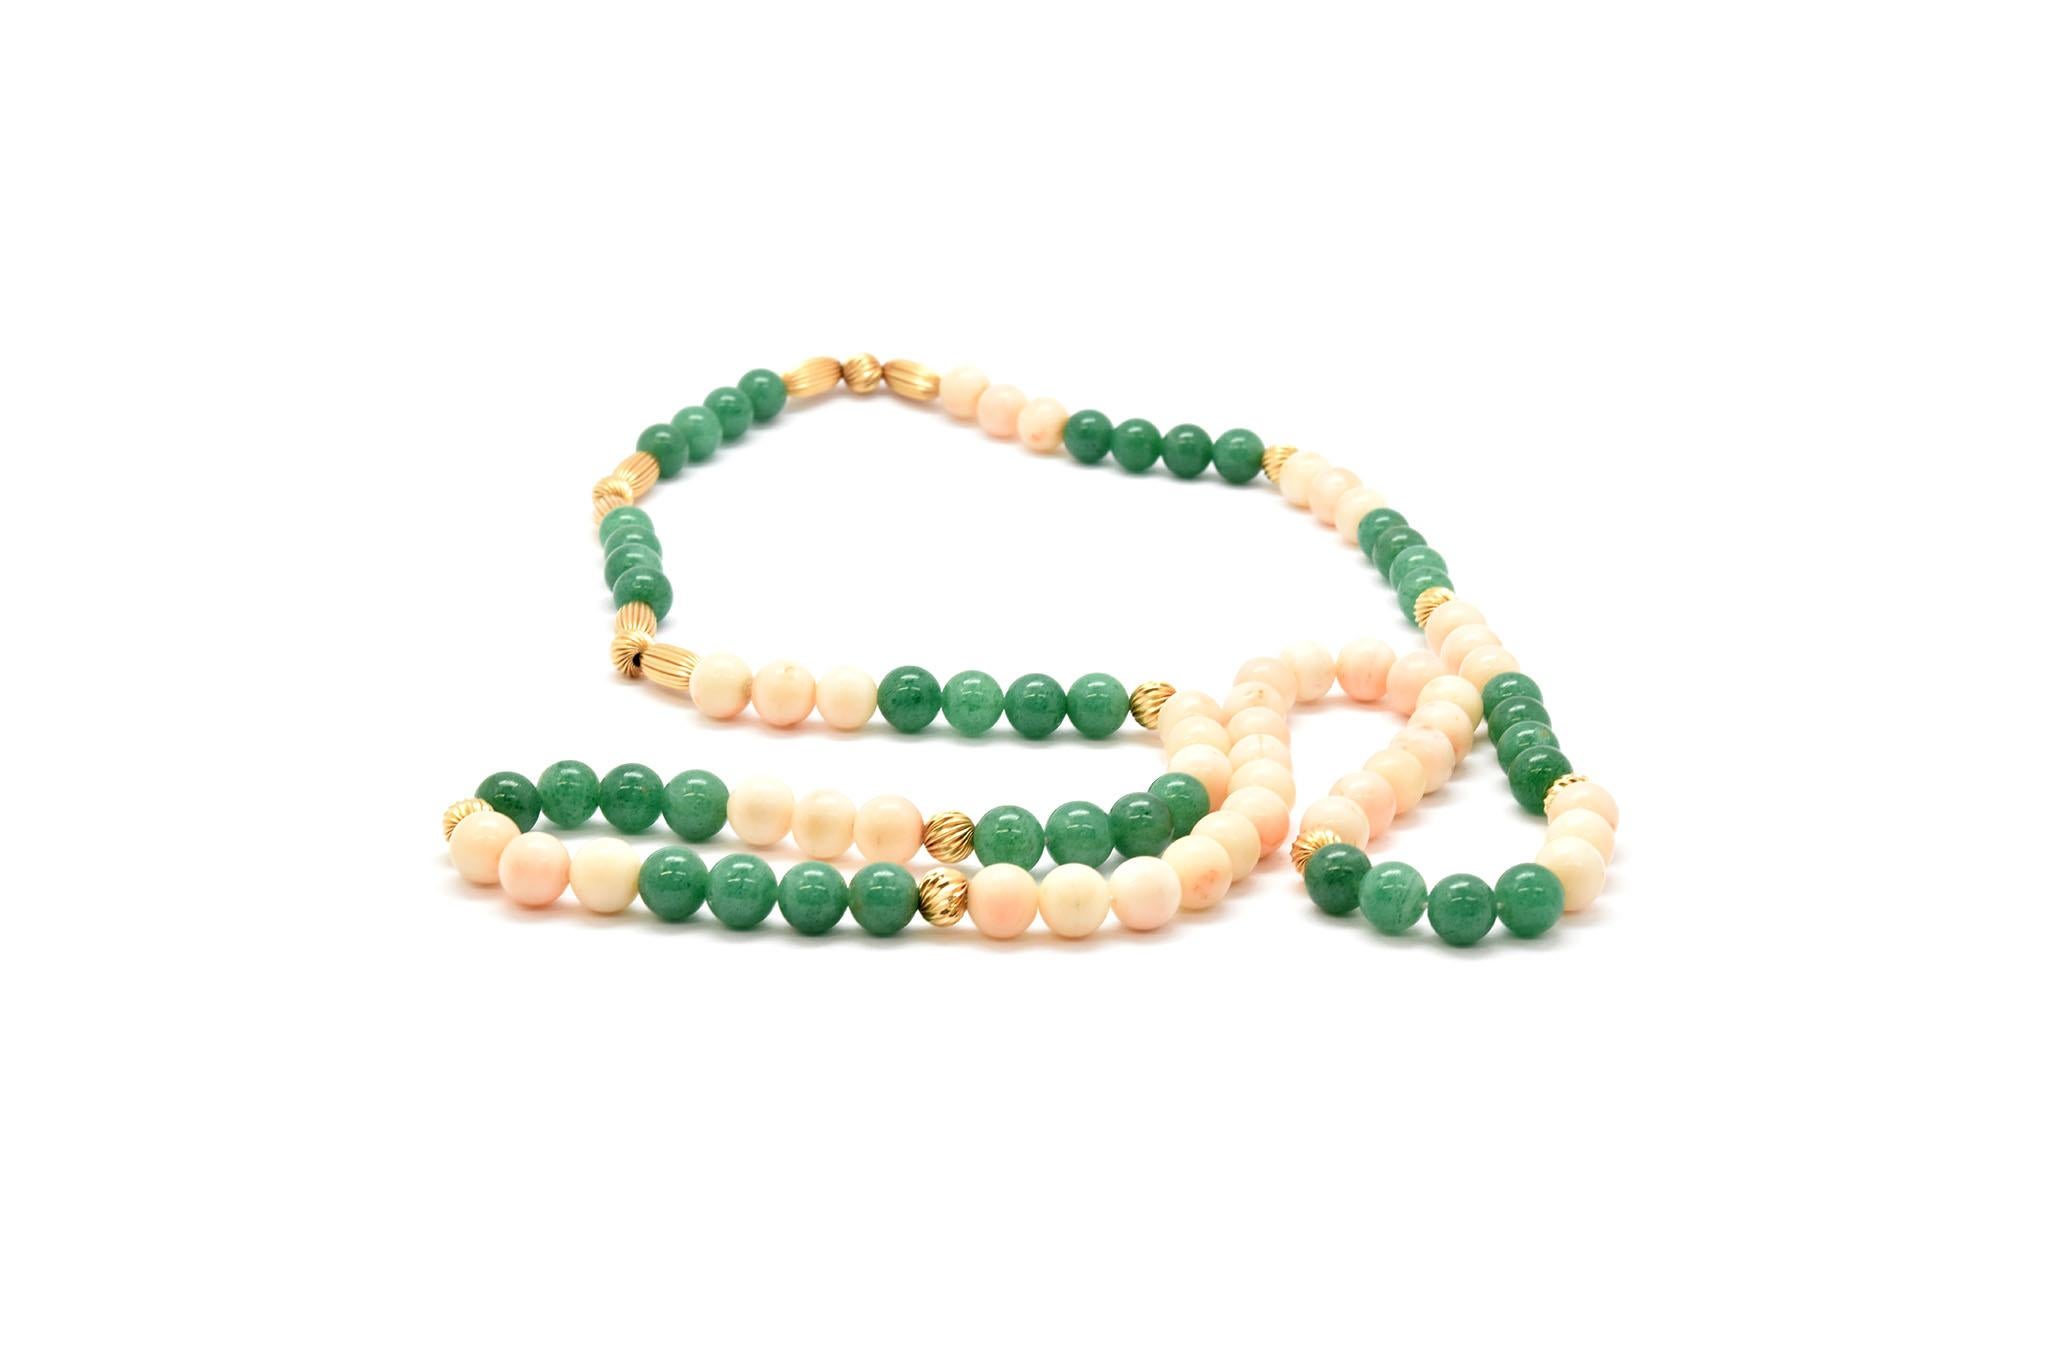 Contemporary 14 Karat Yellow Gold, Coral and Green Jade Bead Necklace